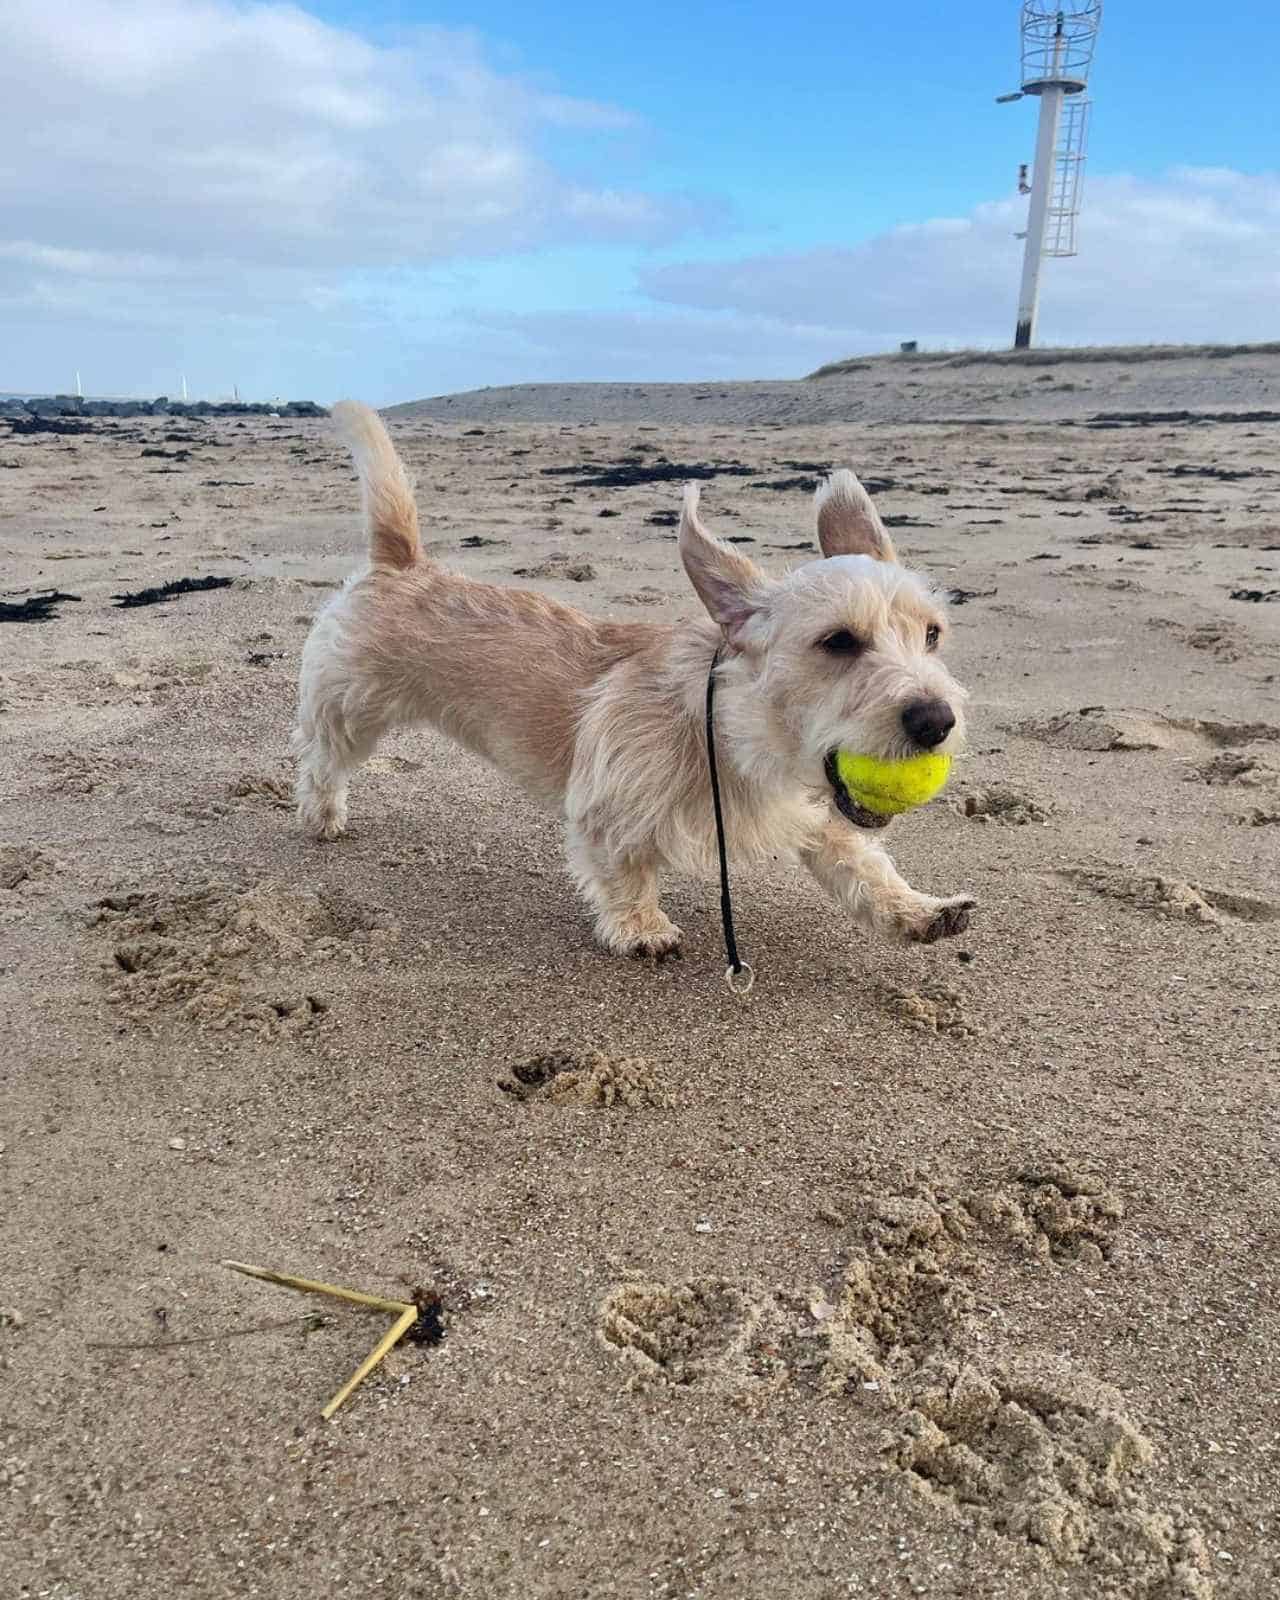 Mauxie runs along the beach with the ball in his mouth